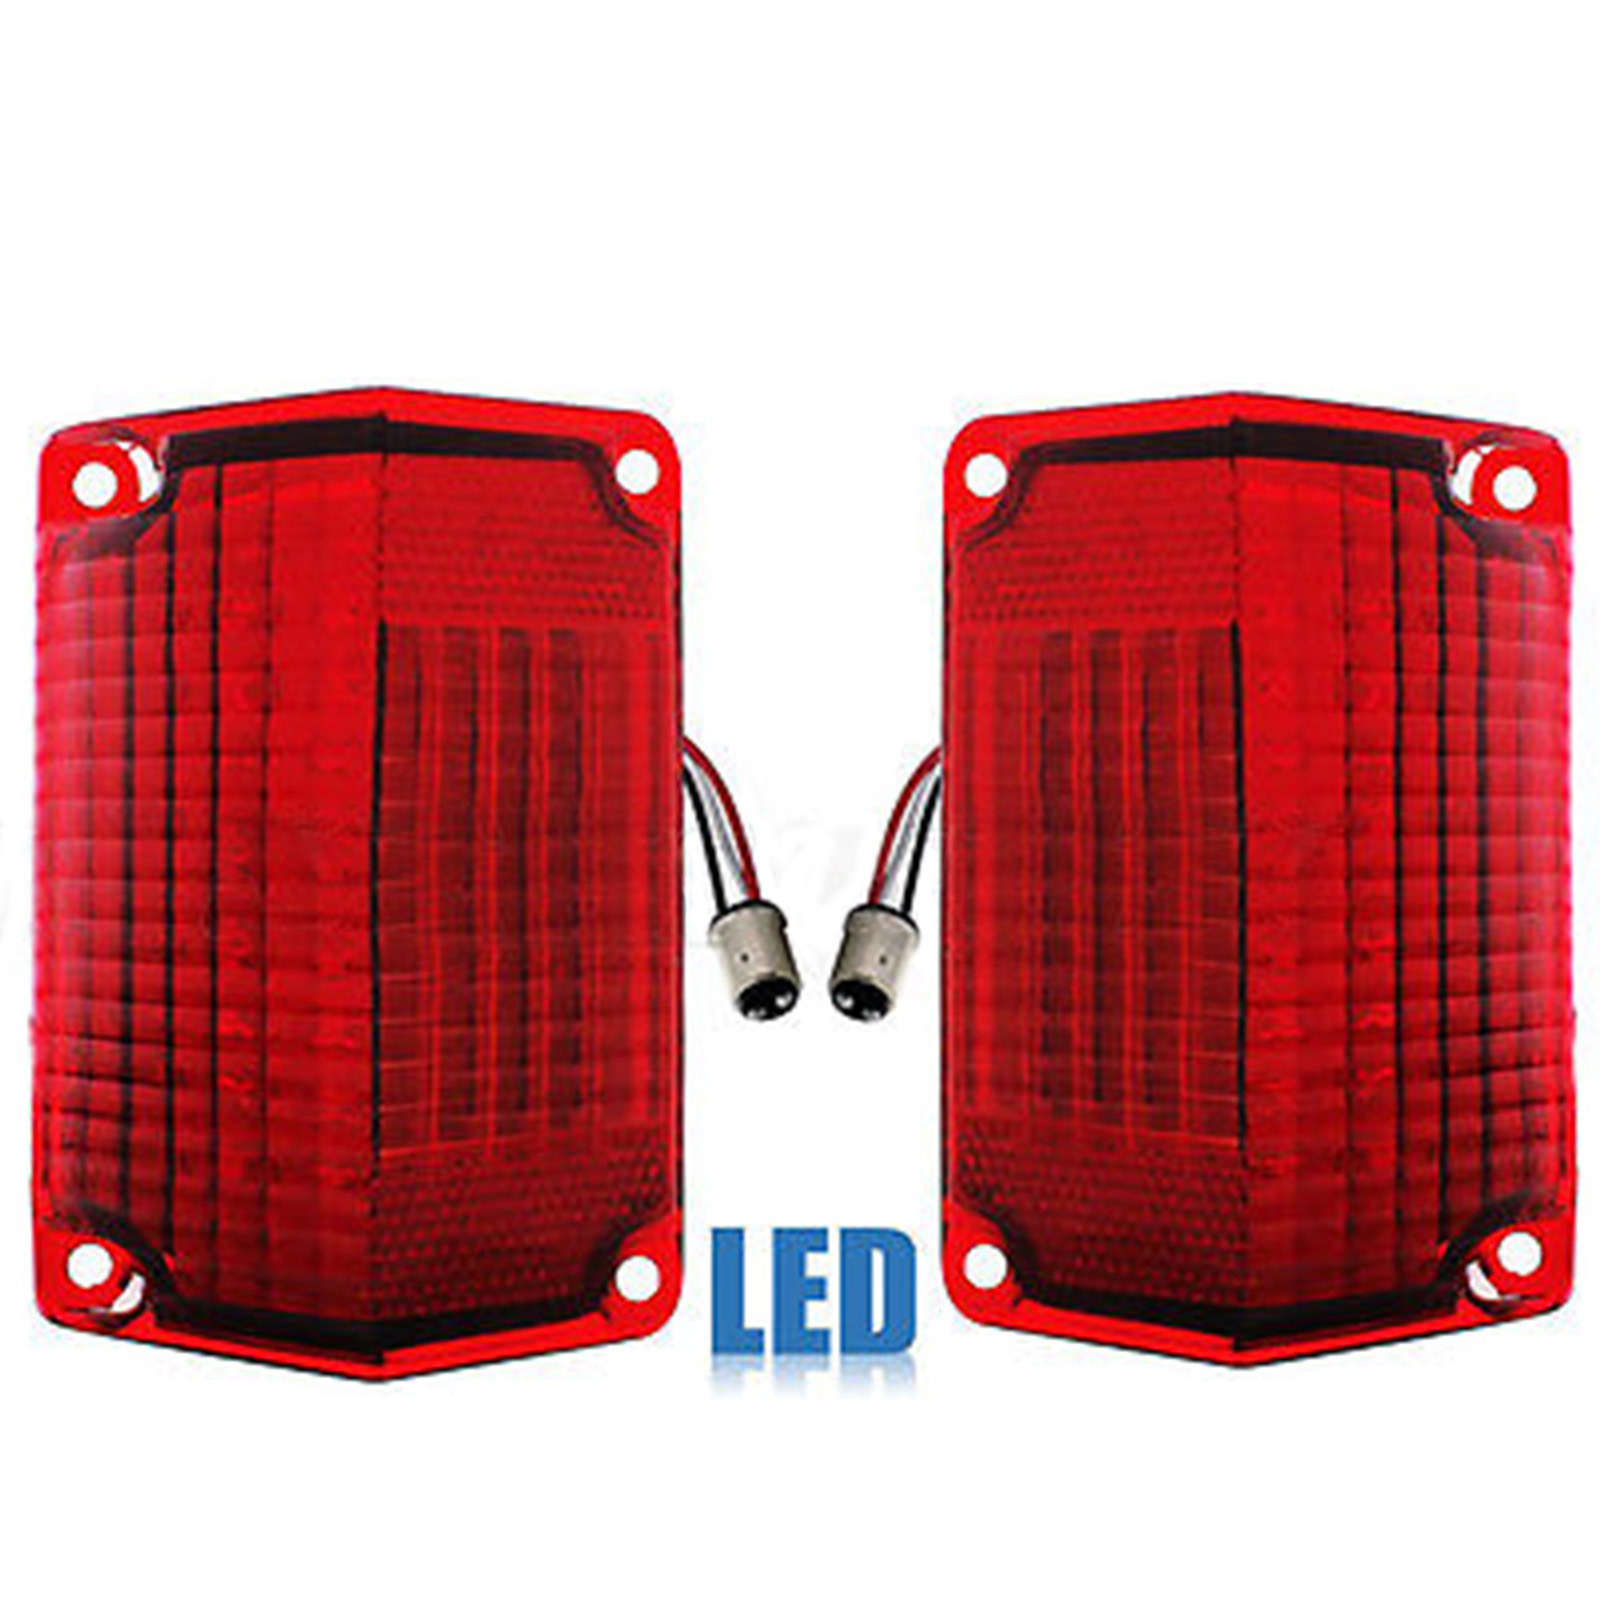 68 69 Chevy El Camino LED Tail Turn Signal Light Lenses w/ Gaskets ...